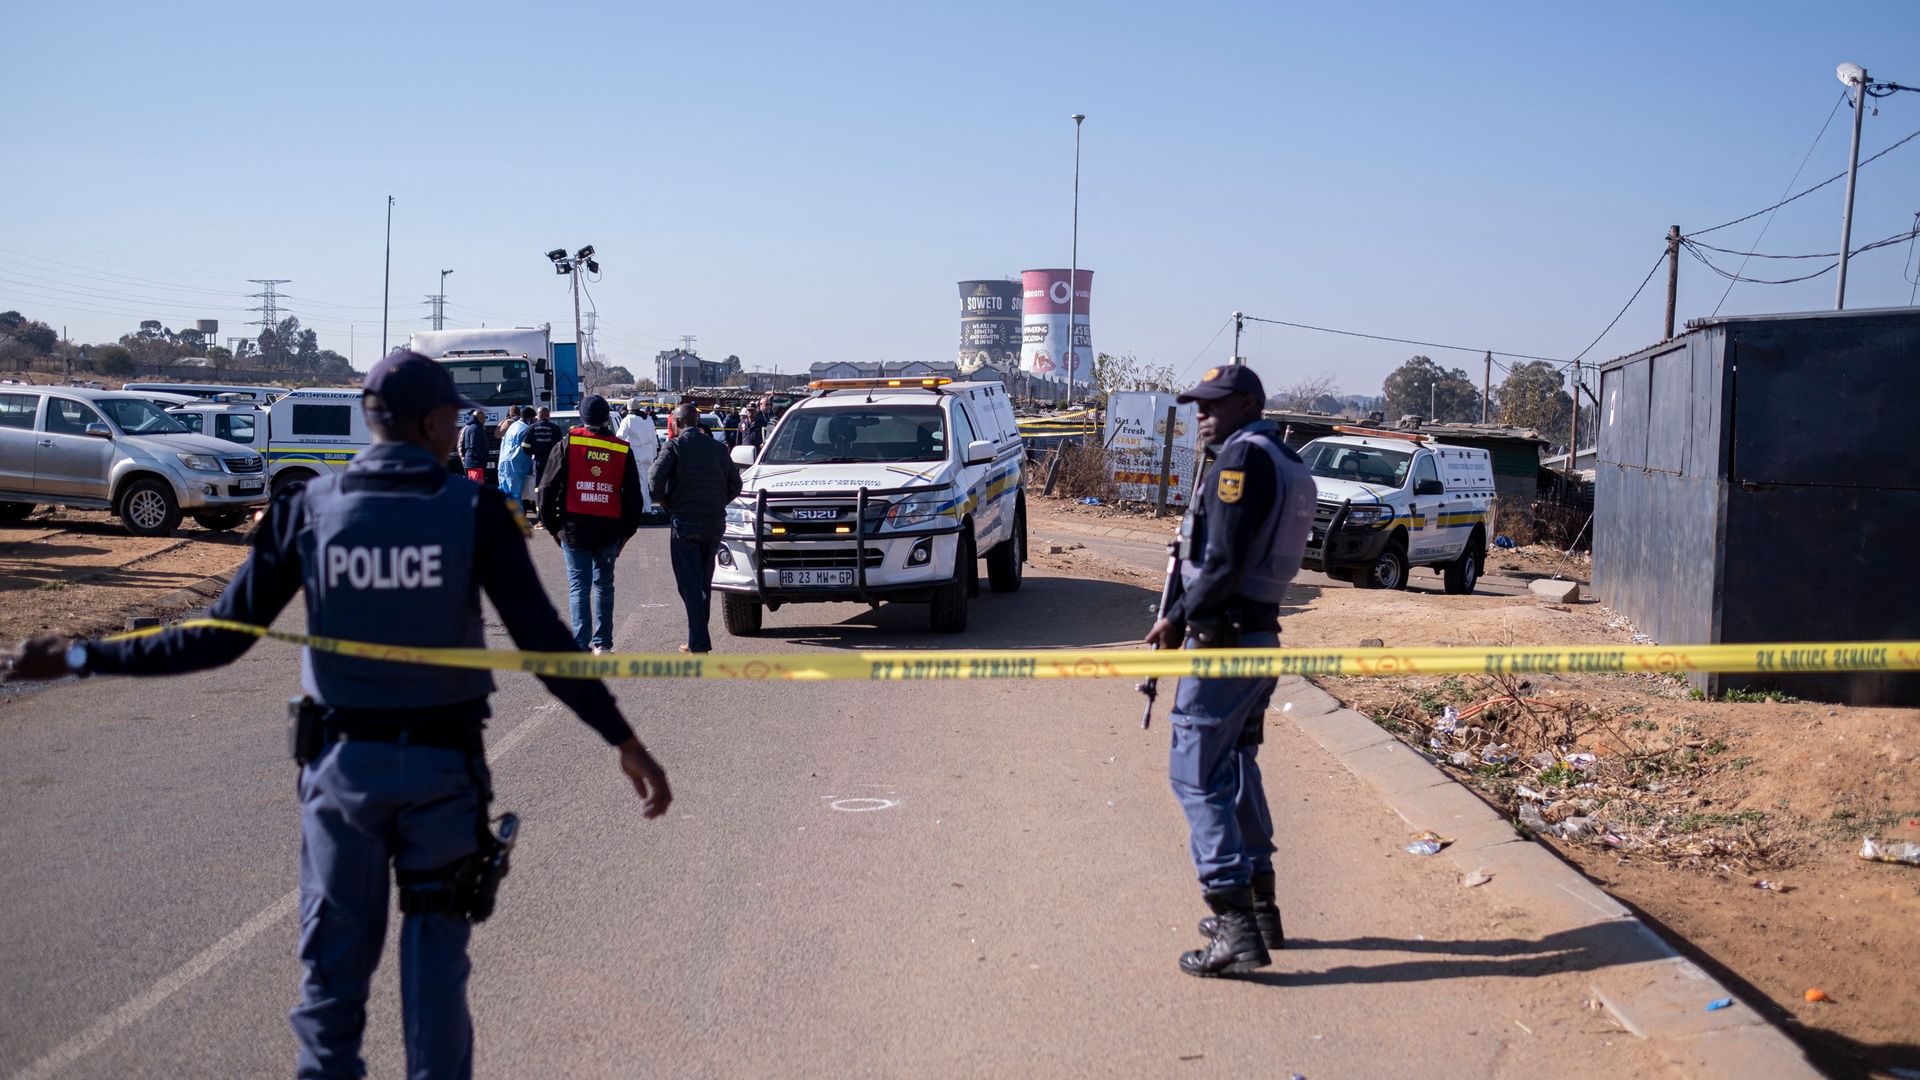 South Africa police after shooting in Soweto